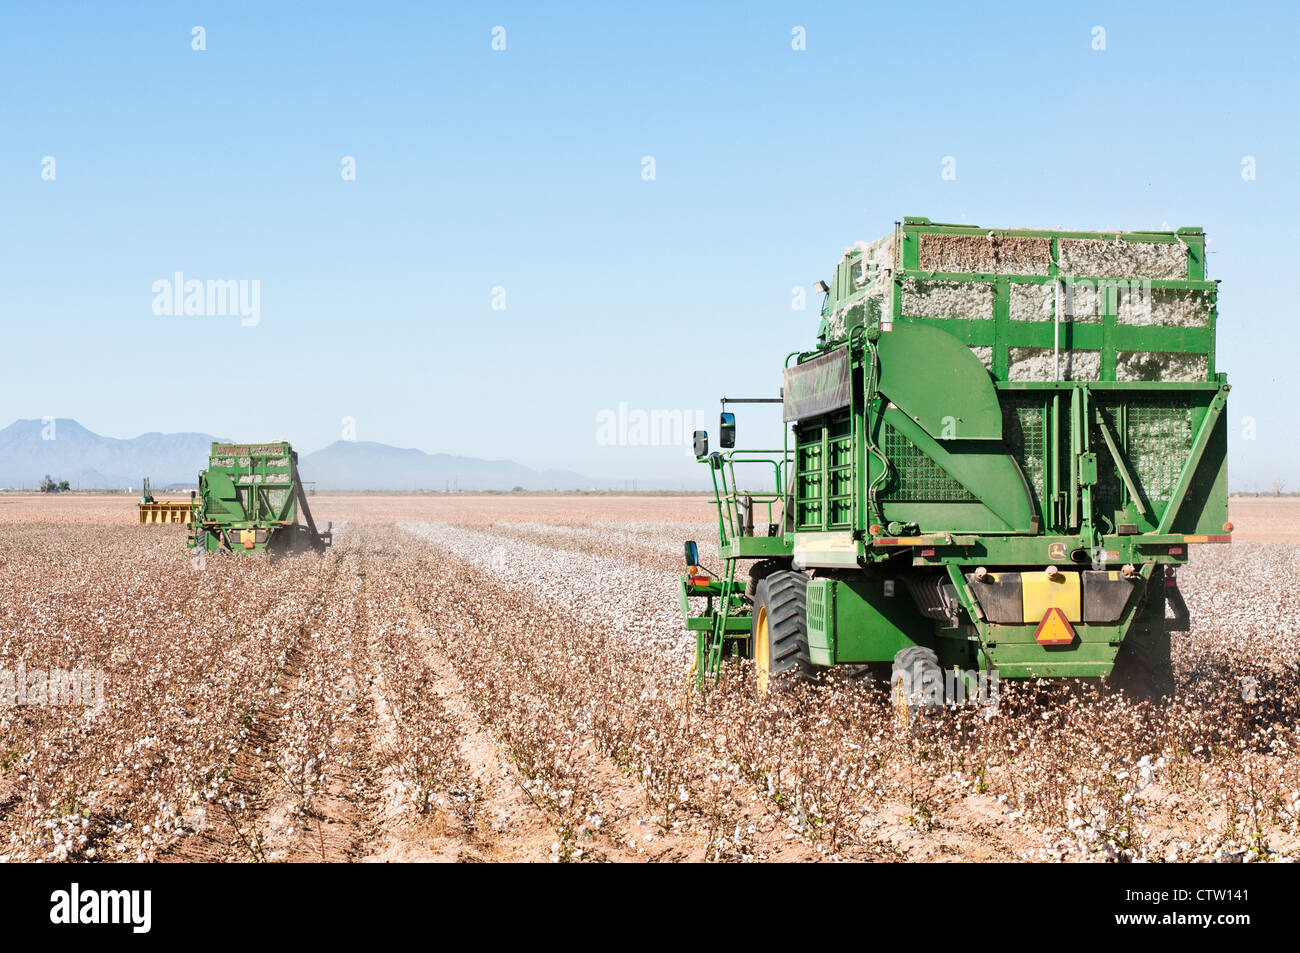 A pair of cotton picking machines harvest a cotton field in Arizona. Stock Photo